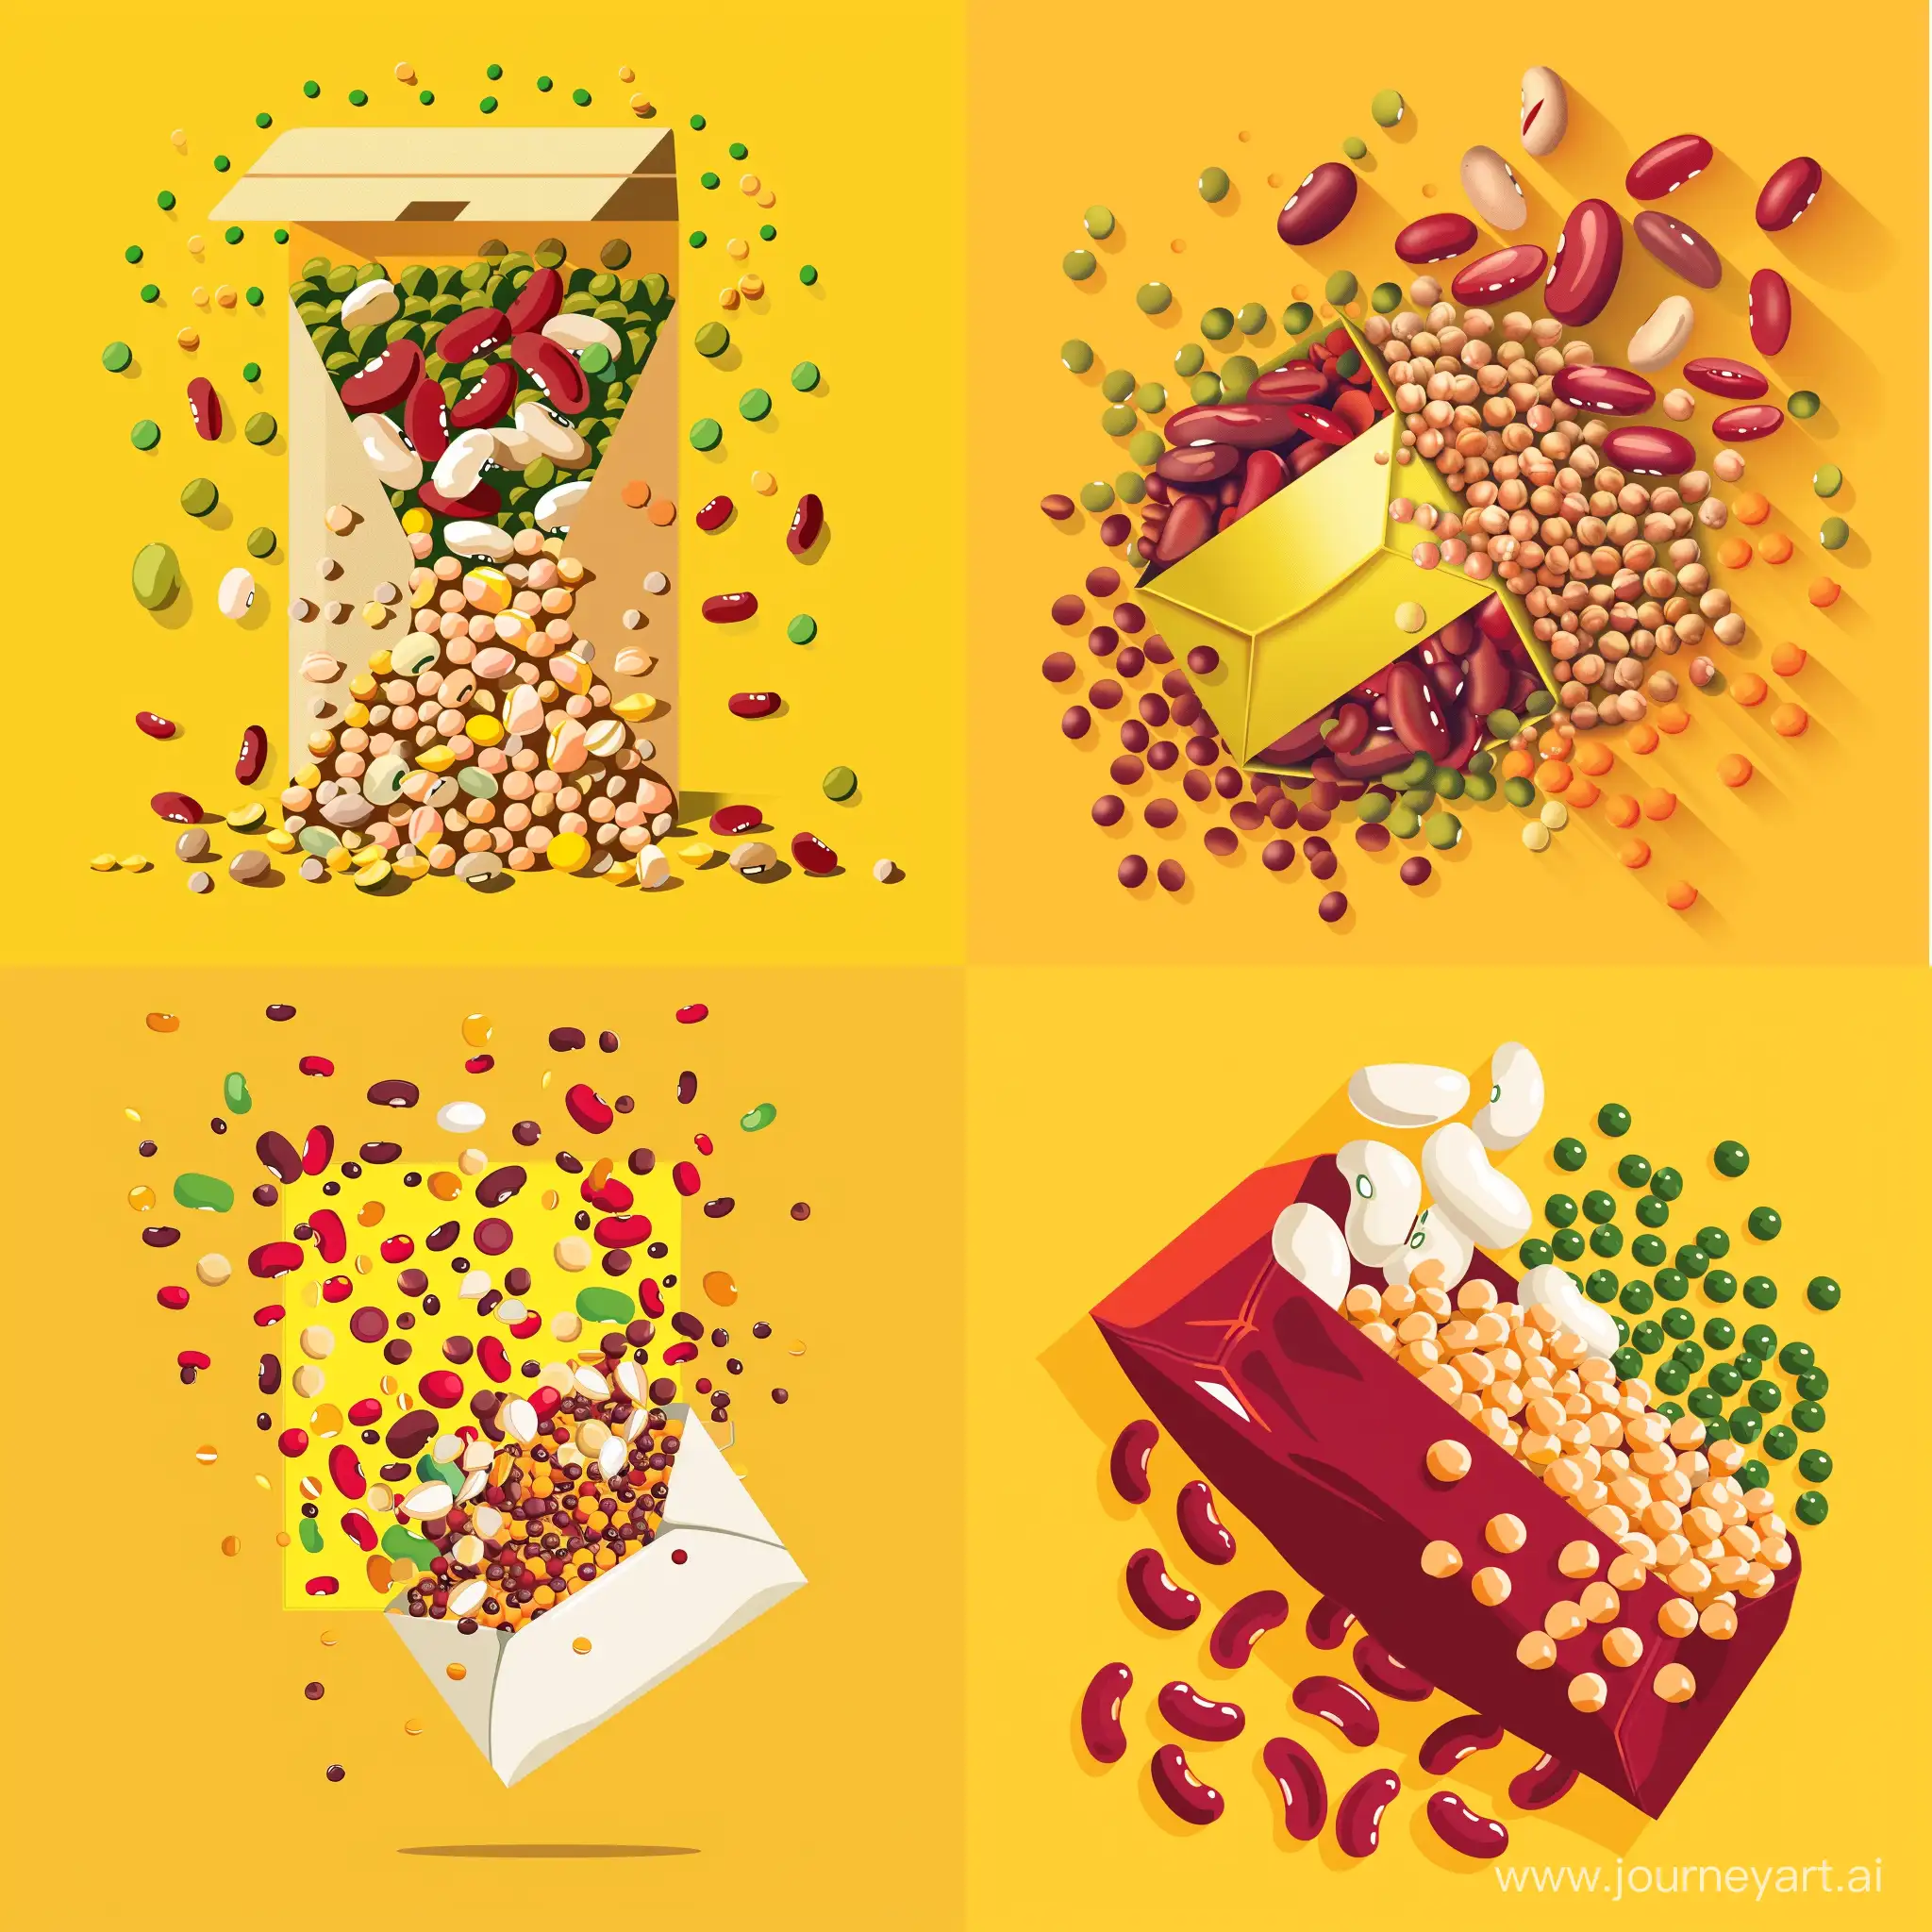 Soldier-Package-with-Beans-Lentils-and-Chickpeas-on-Yellow-Background